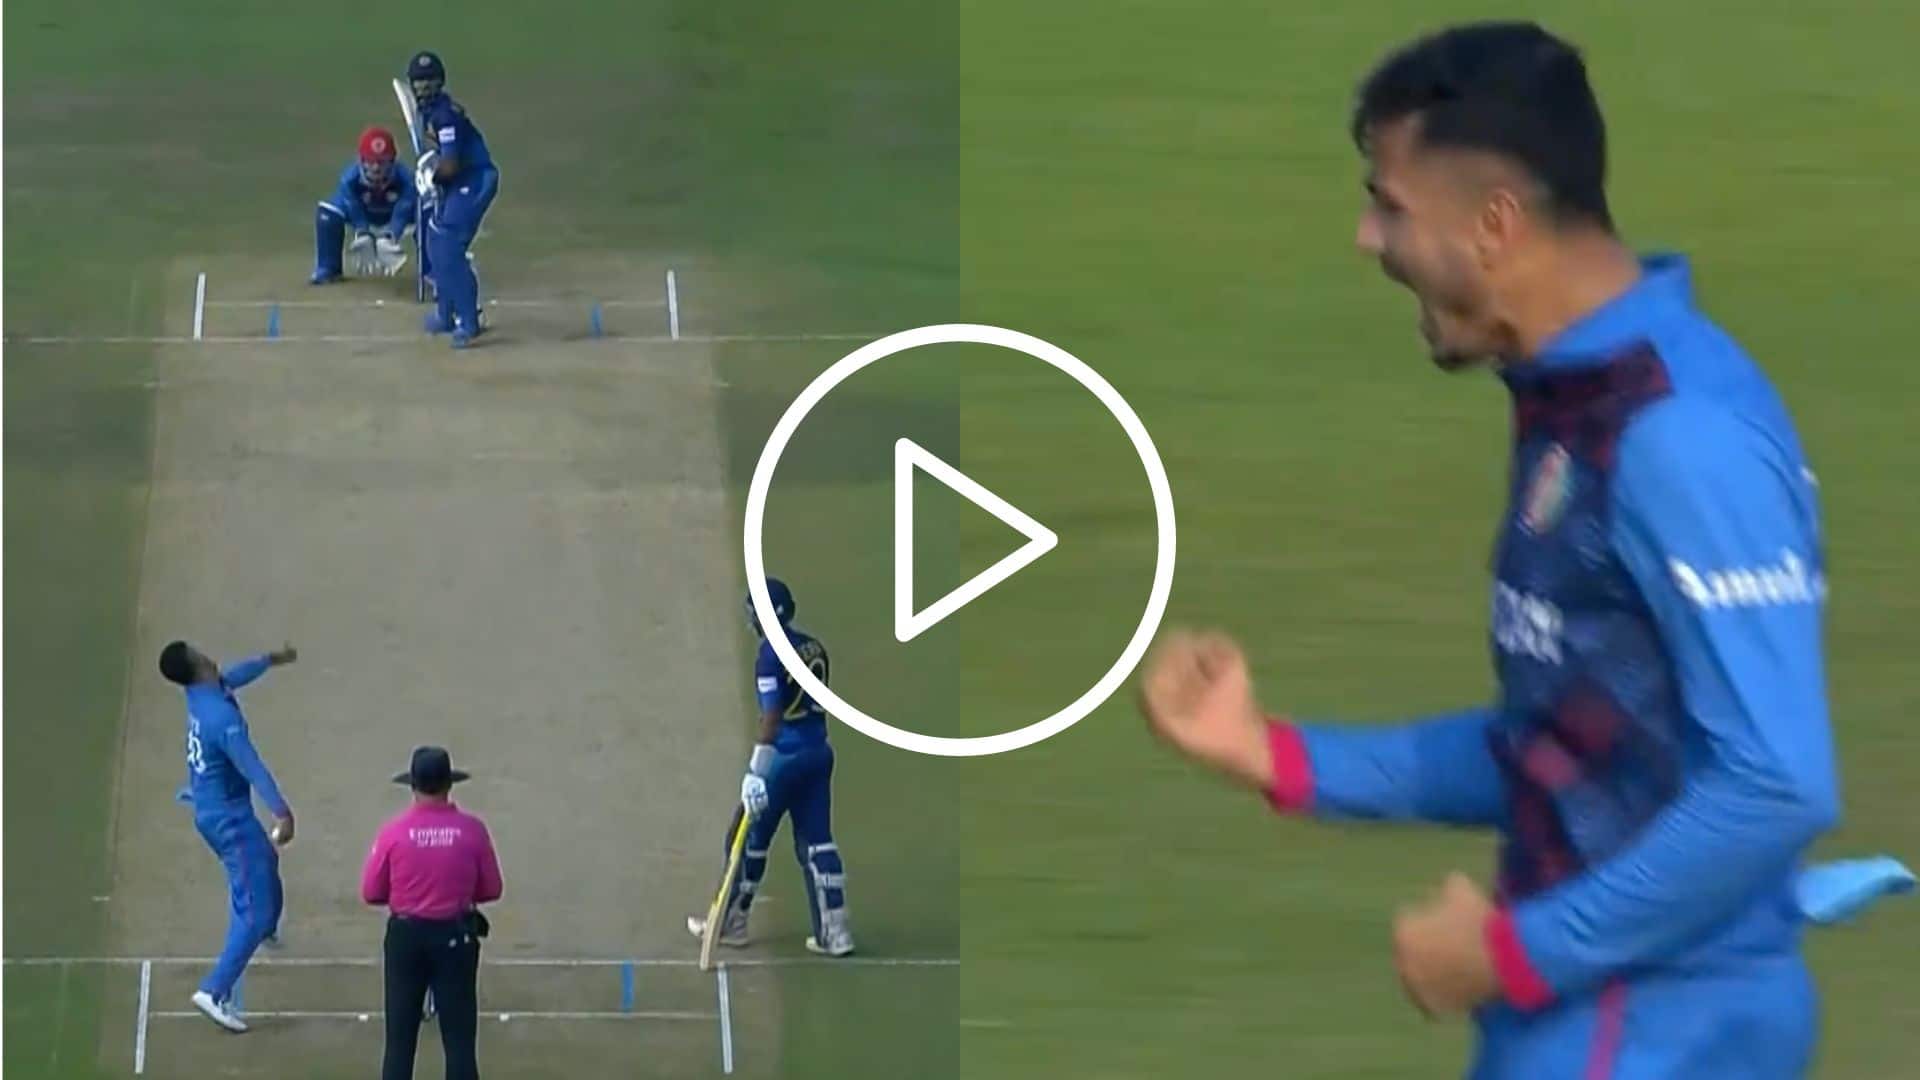 [Watch] Mujeeb Ur Rahman 'Outfoxes' Kusal Mendis With A Beautiful Delivery